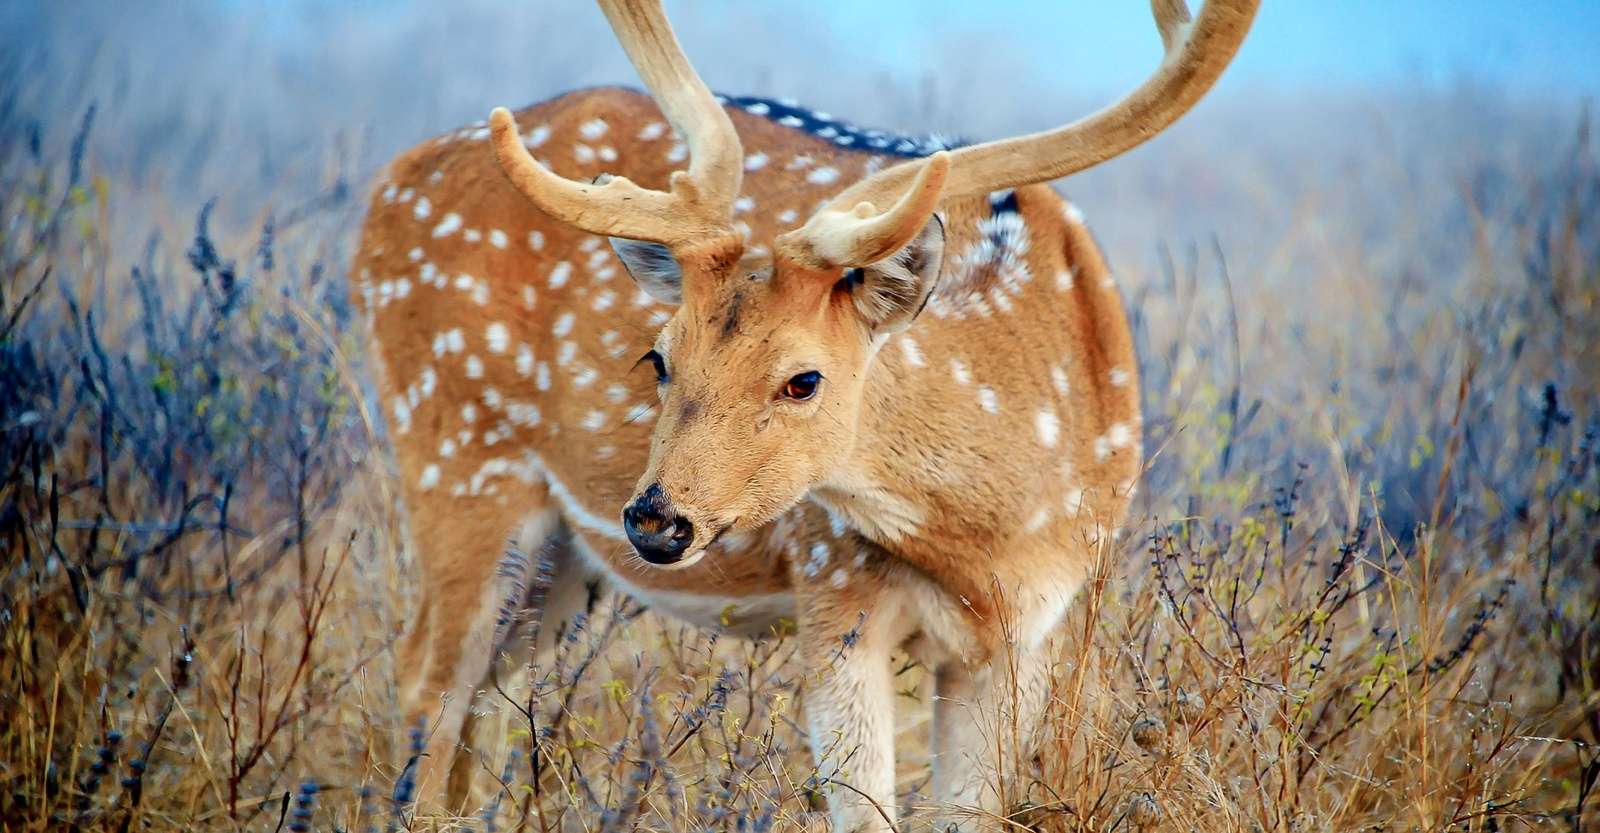 Spotted deer, Ranthambore National Park, India.